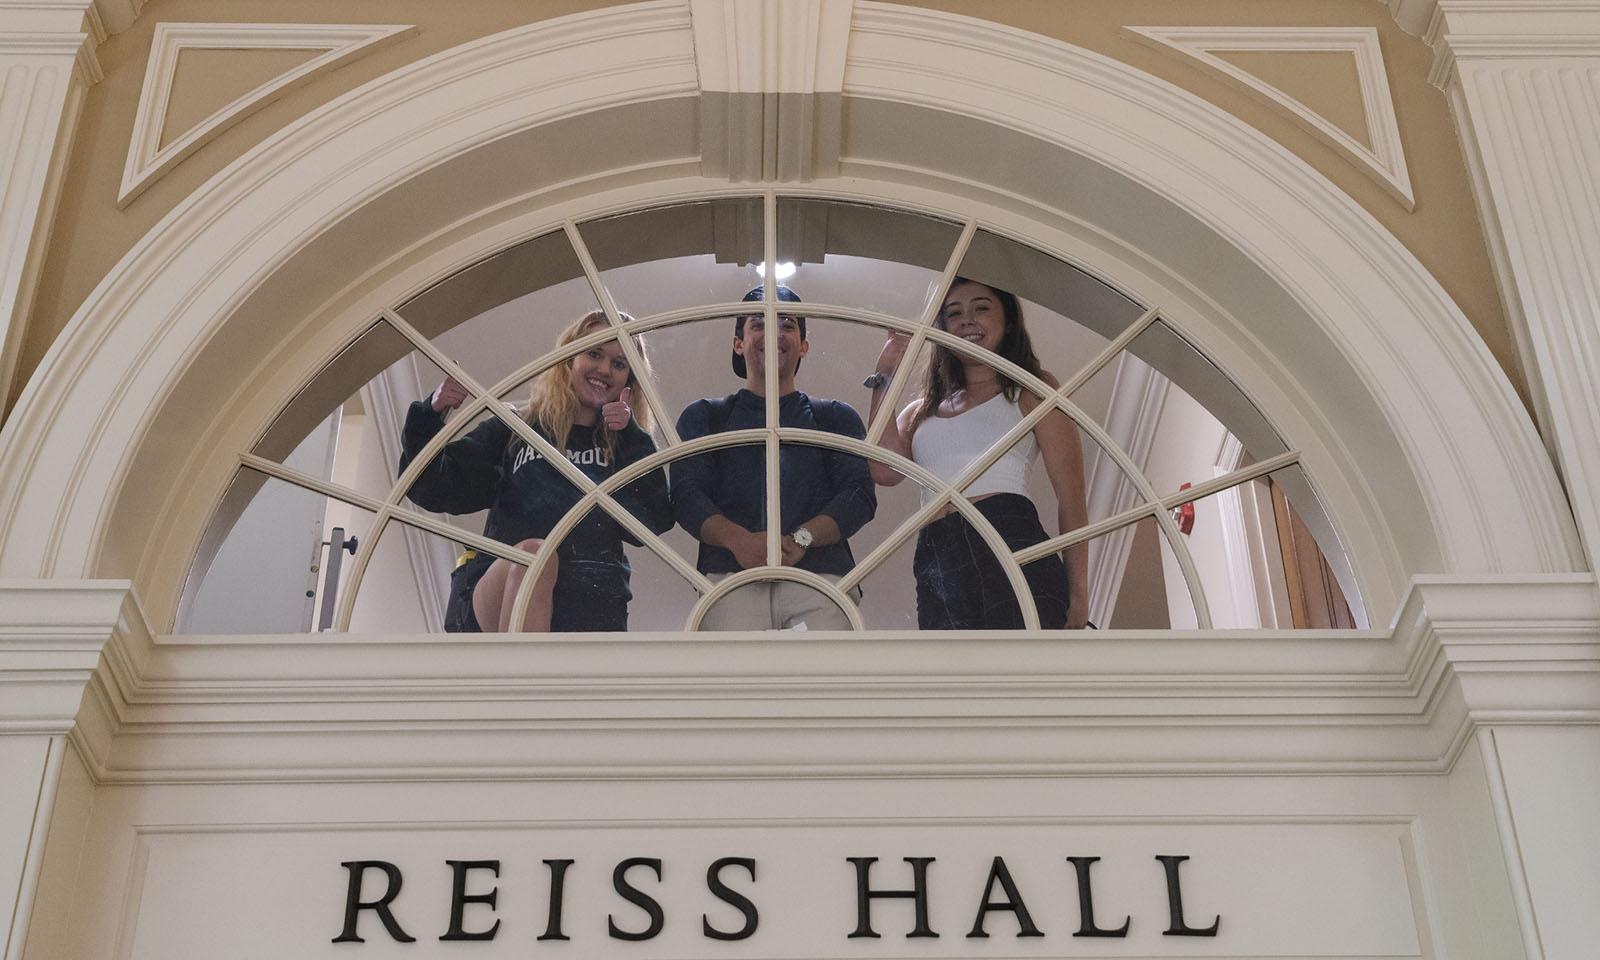 An interior window with "Reiss Hall" written in block letters.